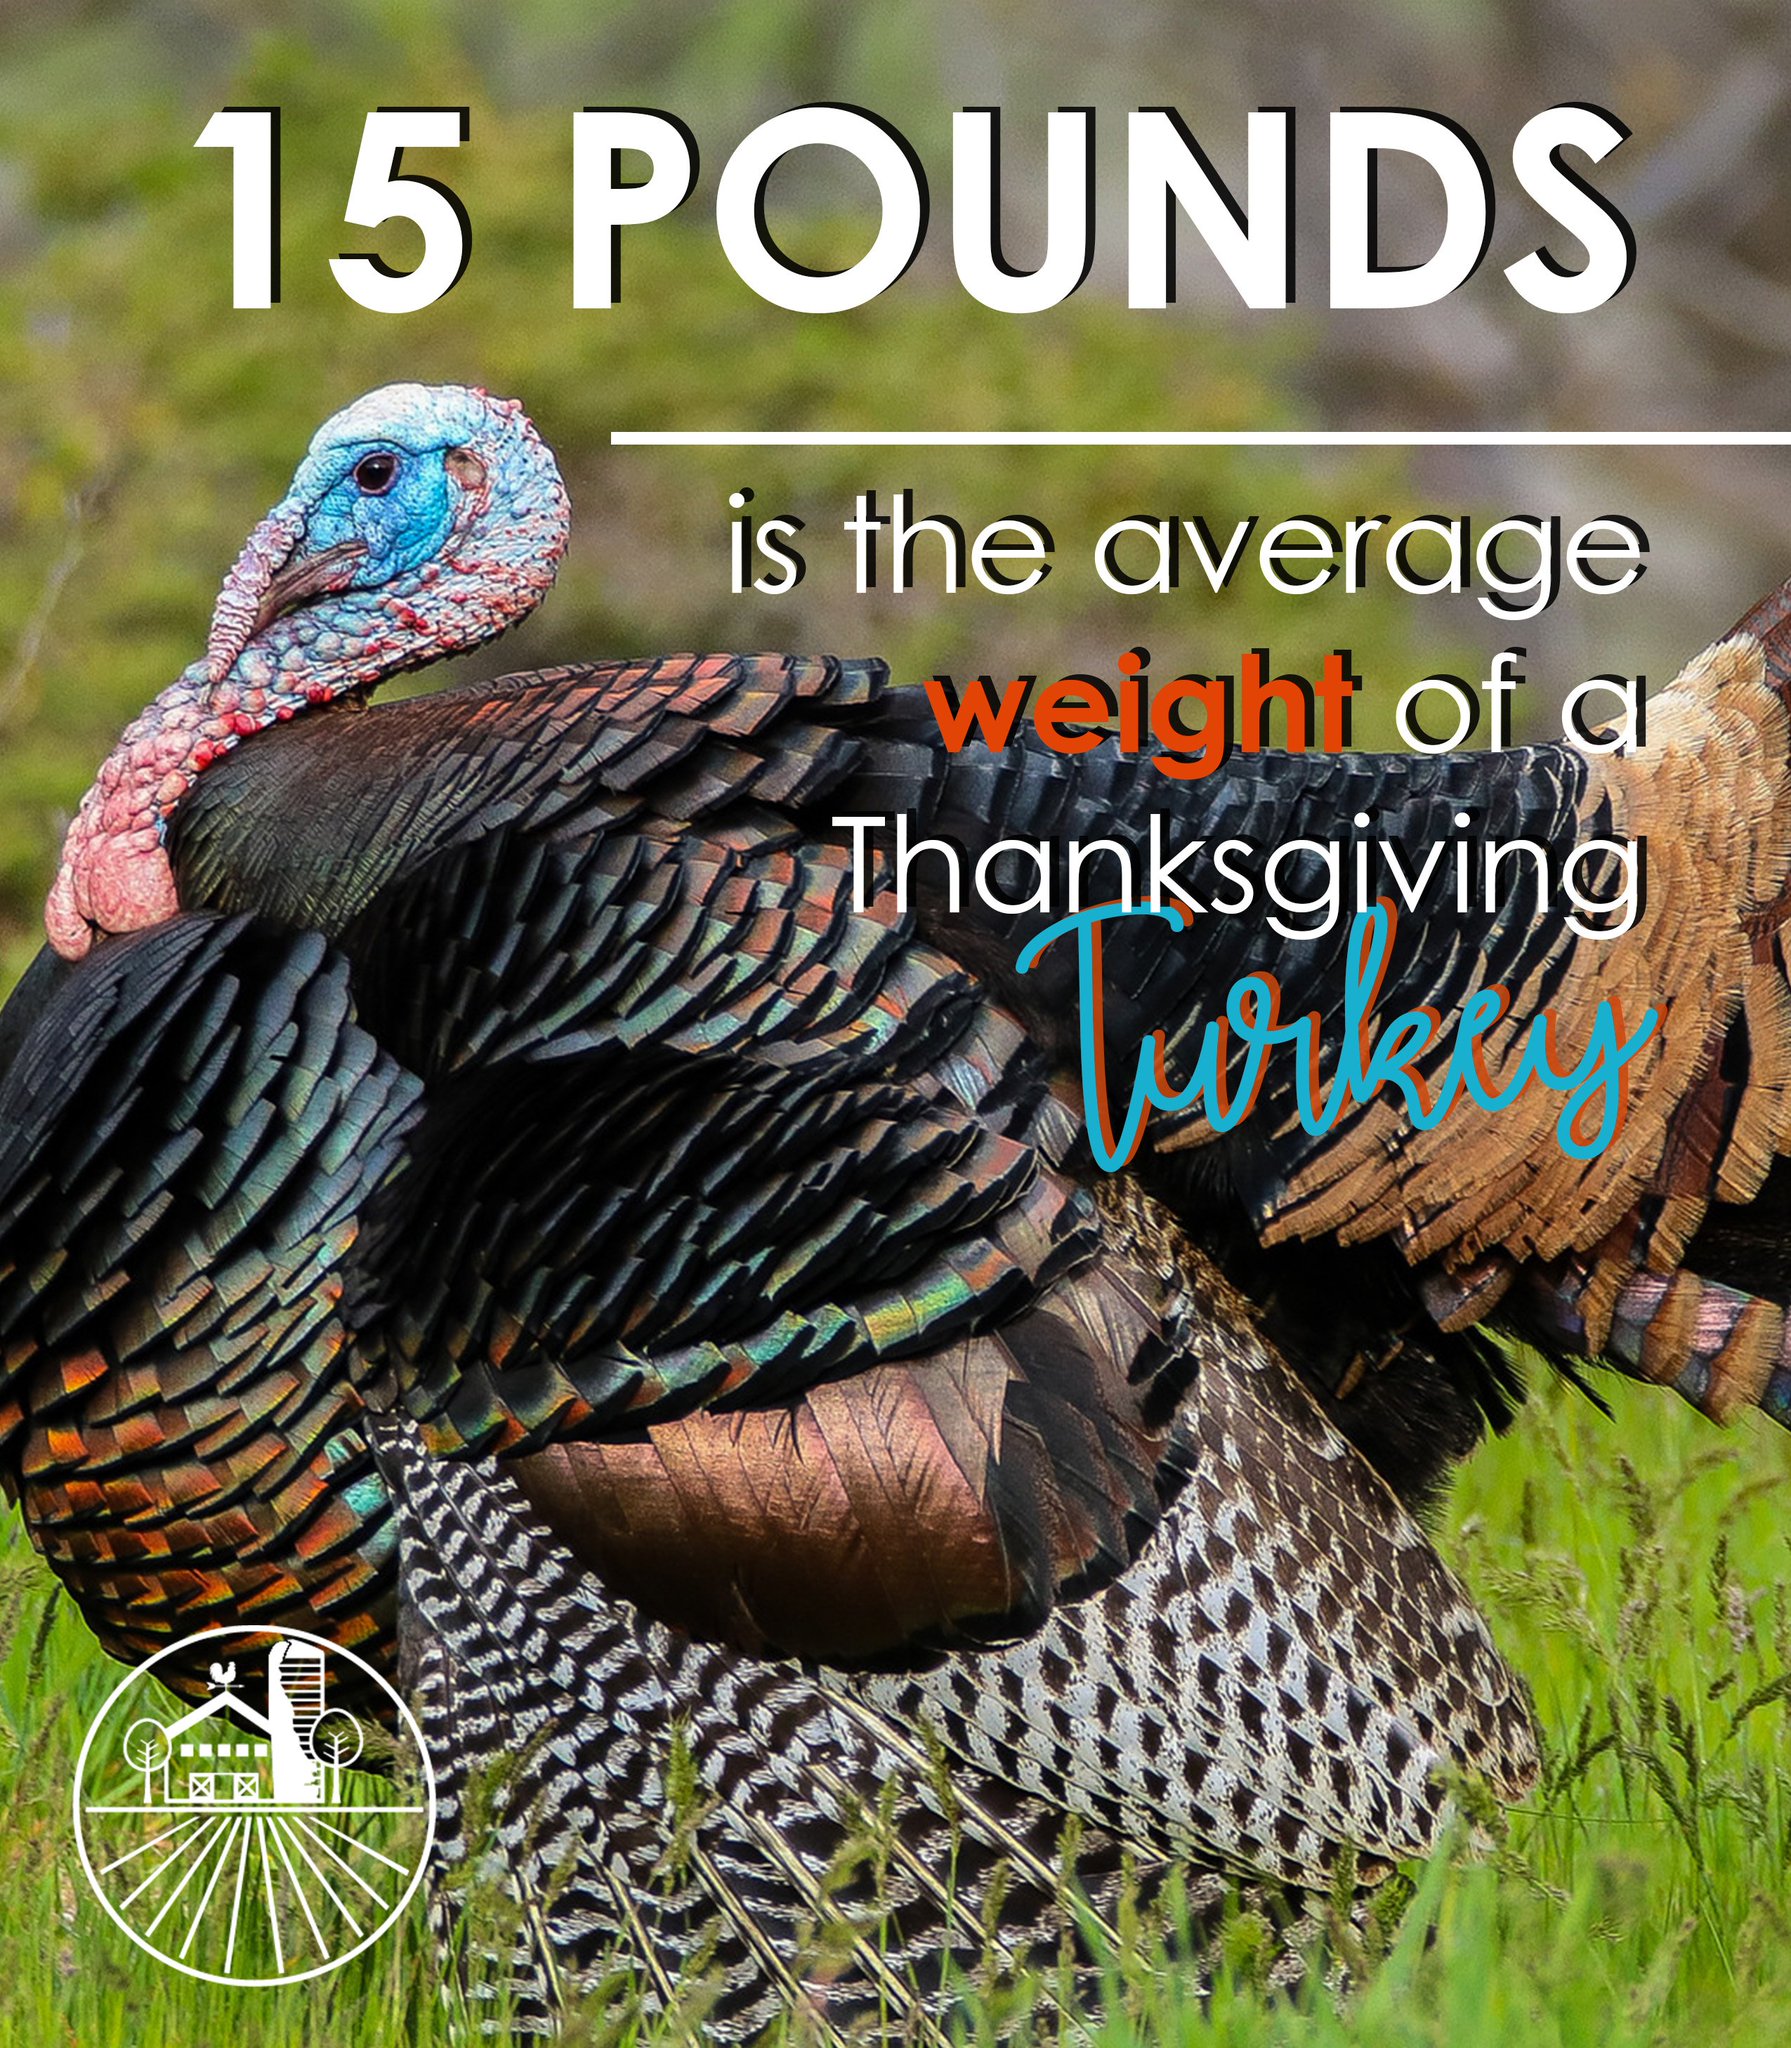 De Dept Of Ag No Twitter Did You Know That The Average Weight Of A Turkey Purchased At Thanksgiving Is 15 Pounds And Of Those 15 Pounds Normally 70 Is White Meat